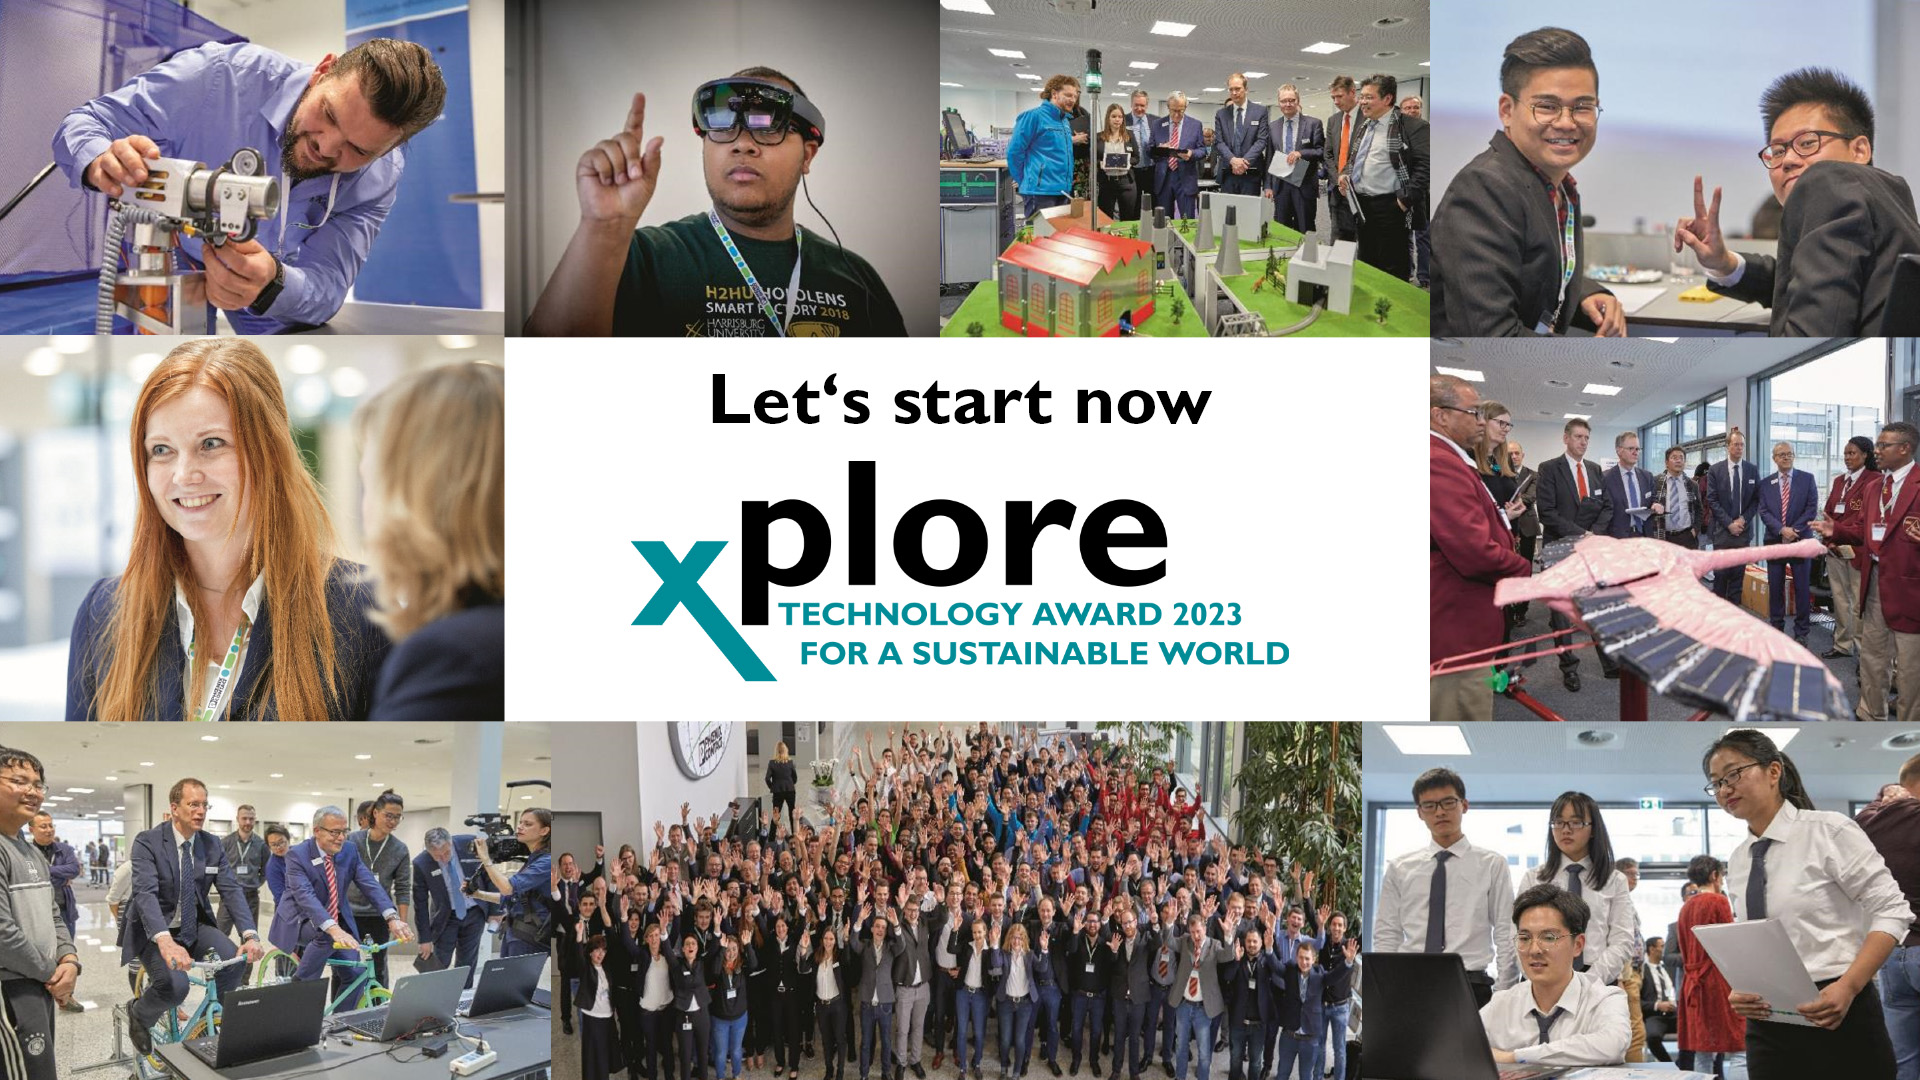 xplore2023 Technology Award goes into the next round: 100 teams from 30 countries start at the technology award for a sustainable world!